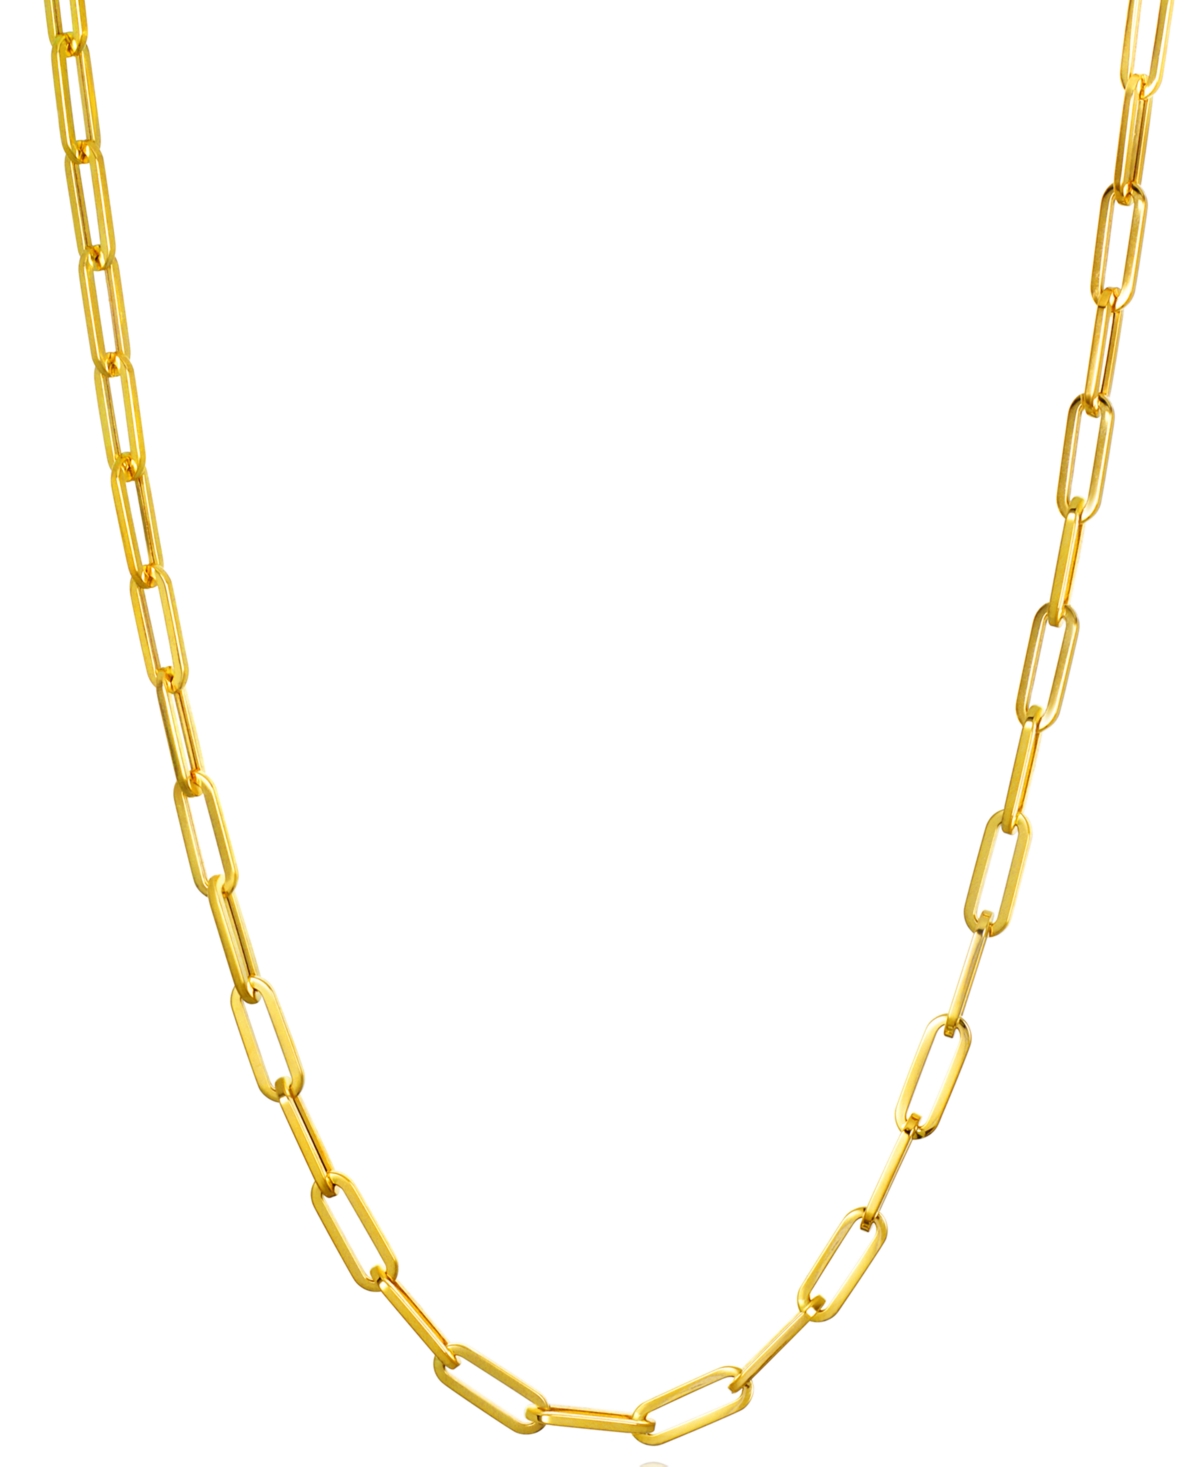 Paperclip Link 16" Chain Necklace in 14k Gold - Yellow Gold